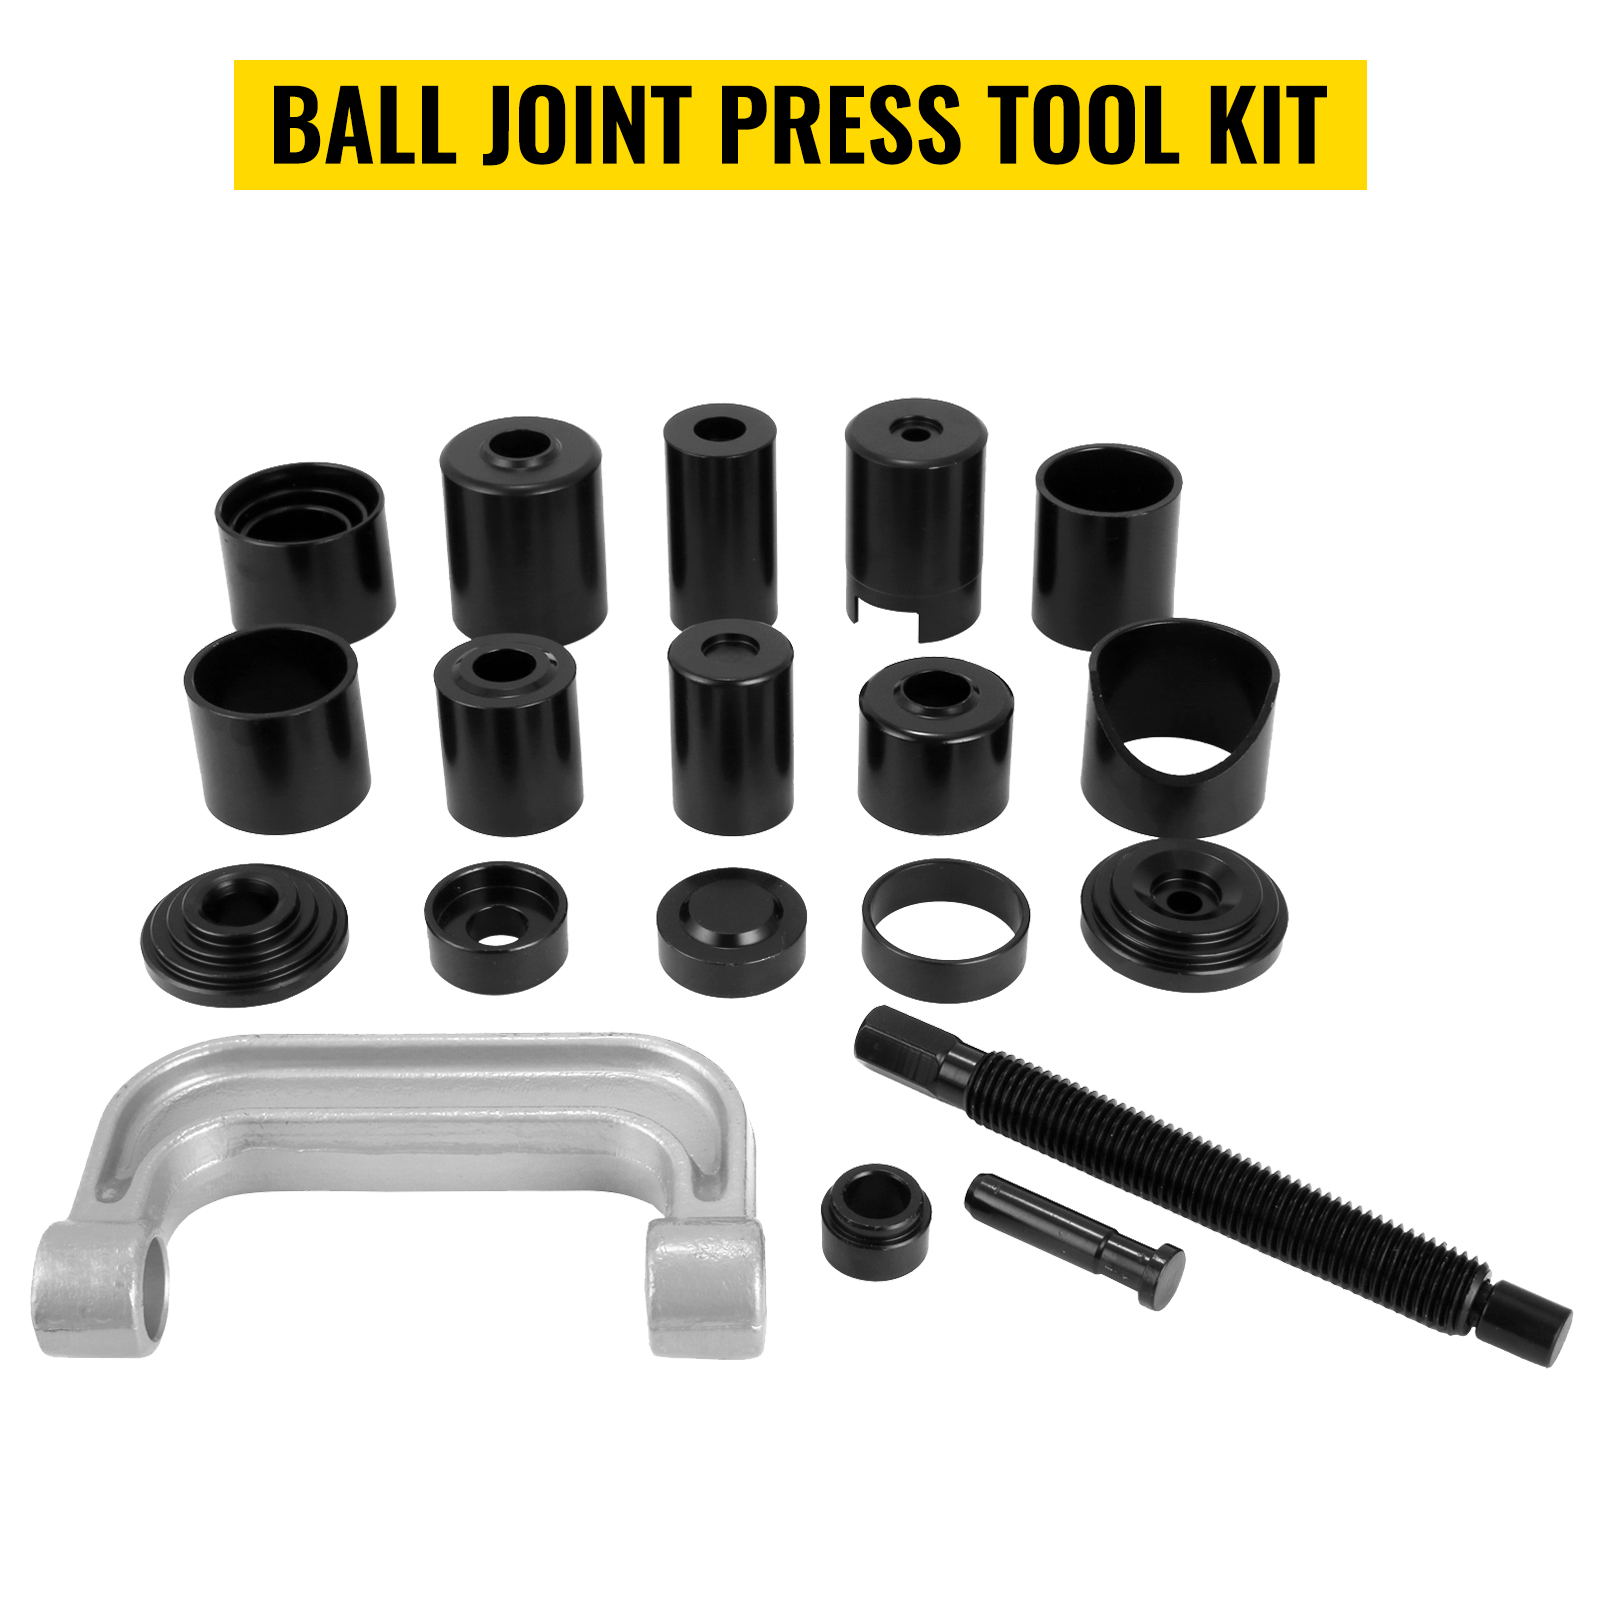 Ball Joint Removers Ball Joint Service Auto Repair Remover Adapter Master Tools with Blow Molded Case for Vehicle Installing Convenient Removal Seperator 21 PCS 